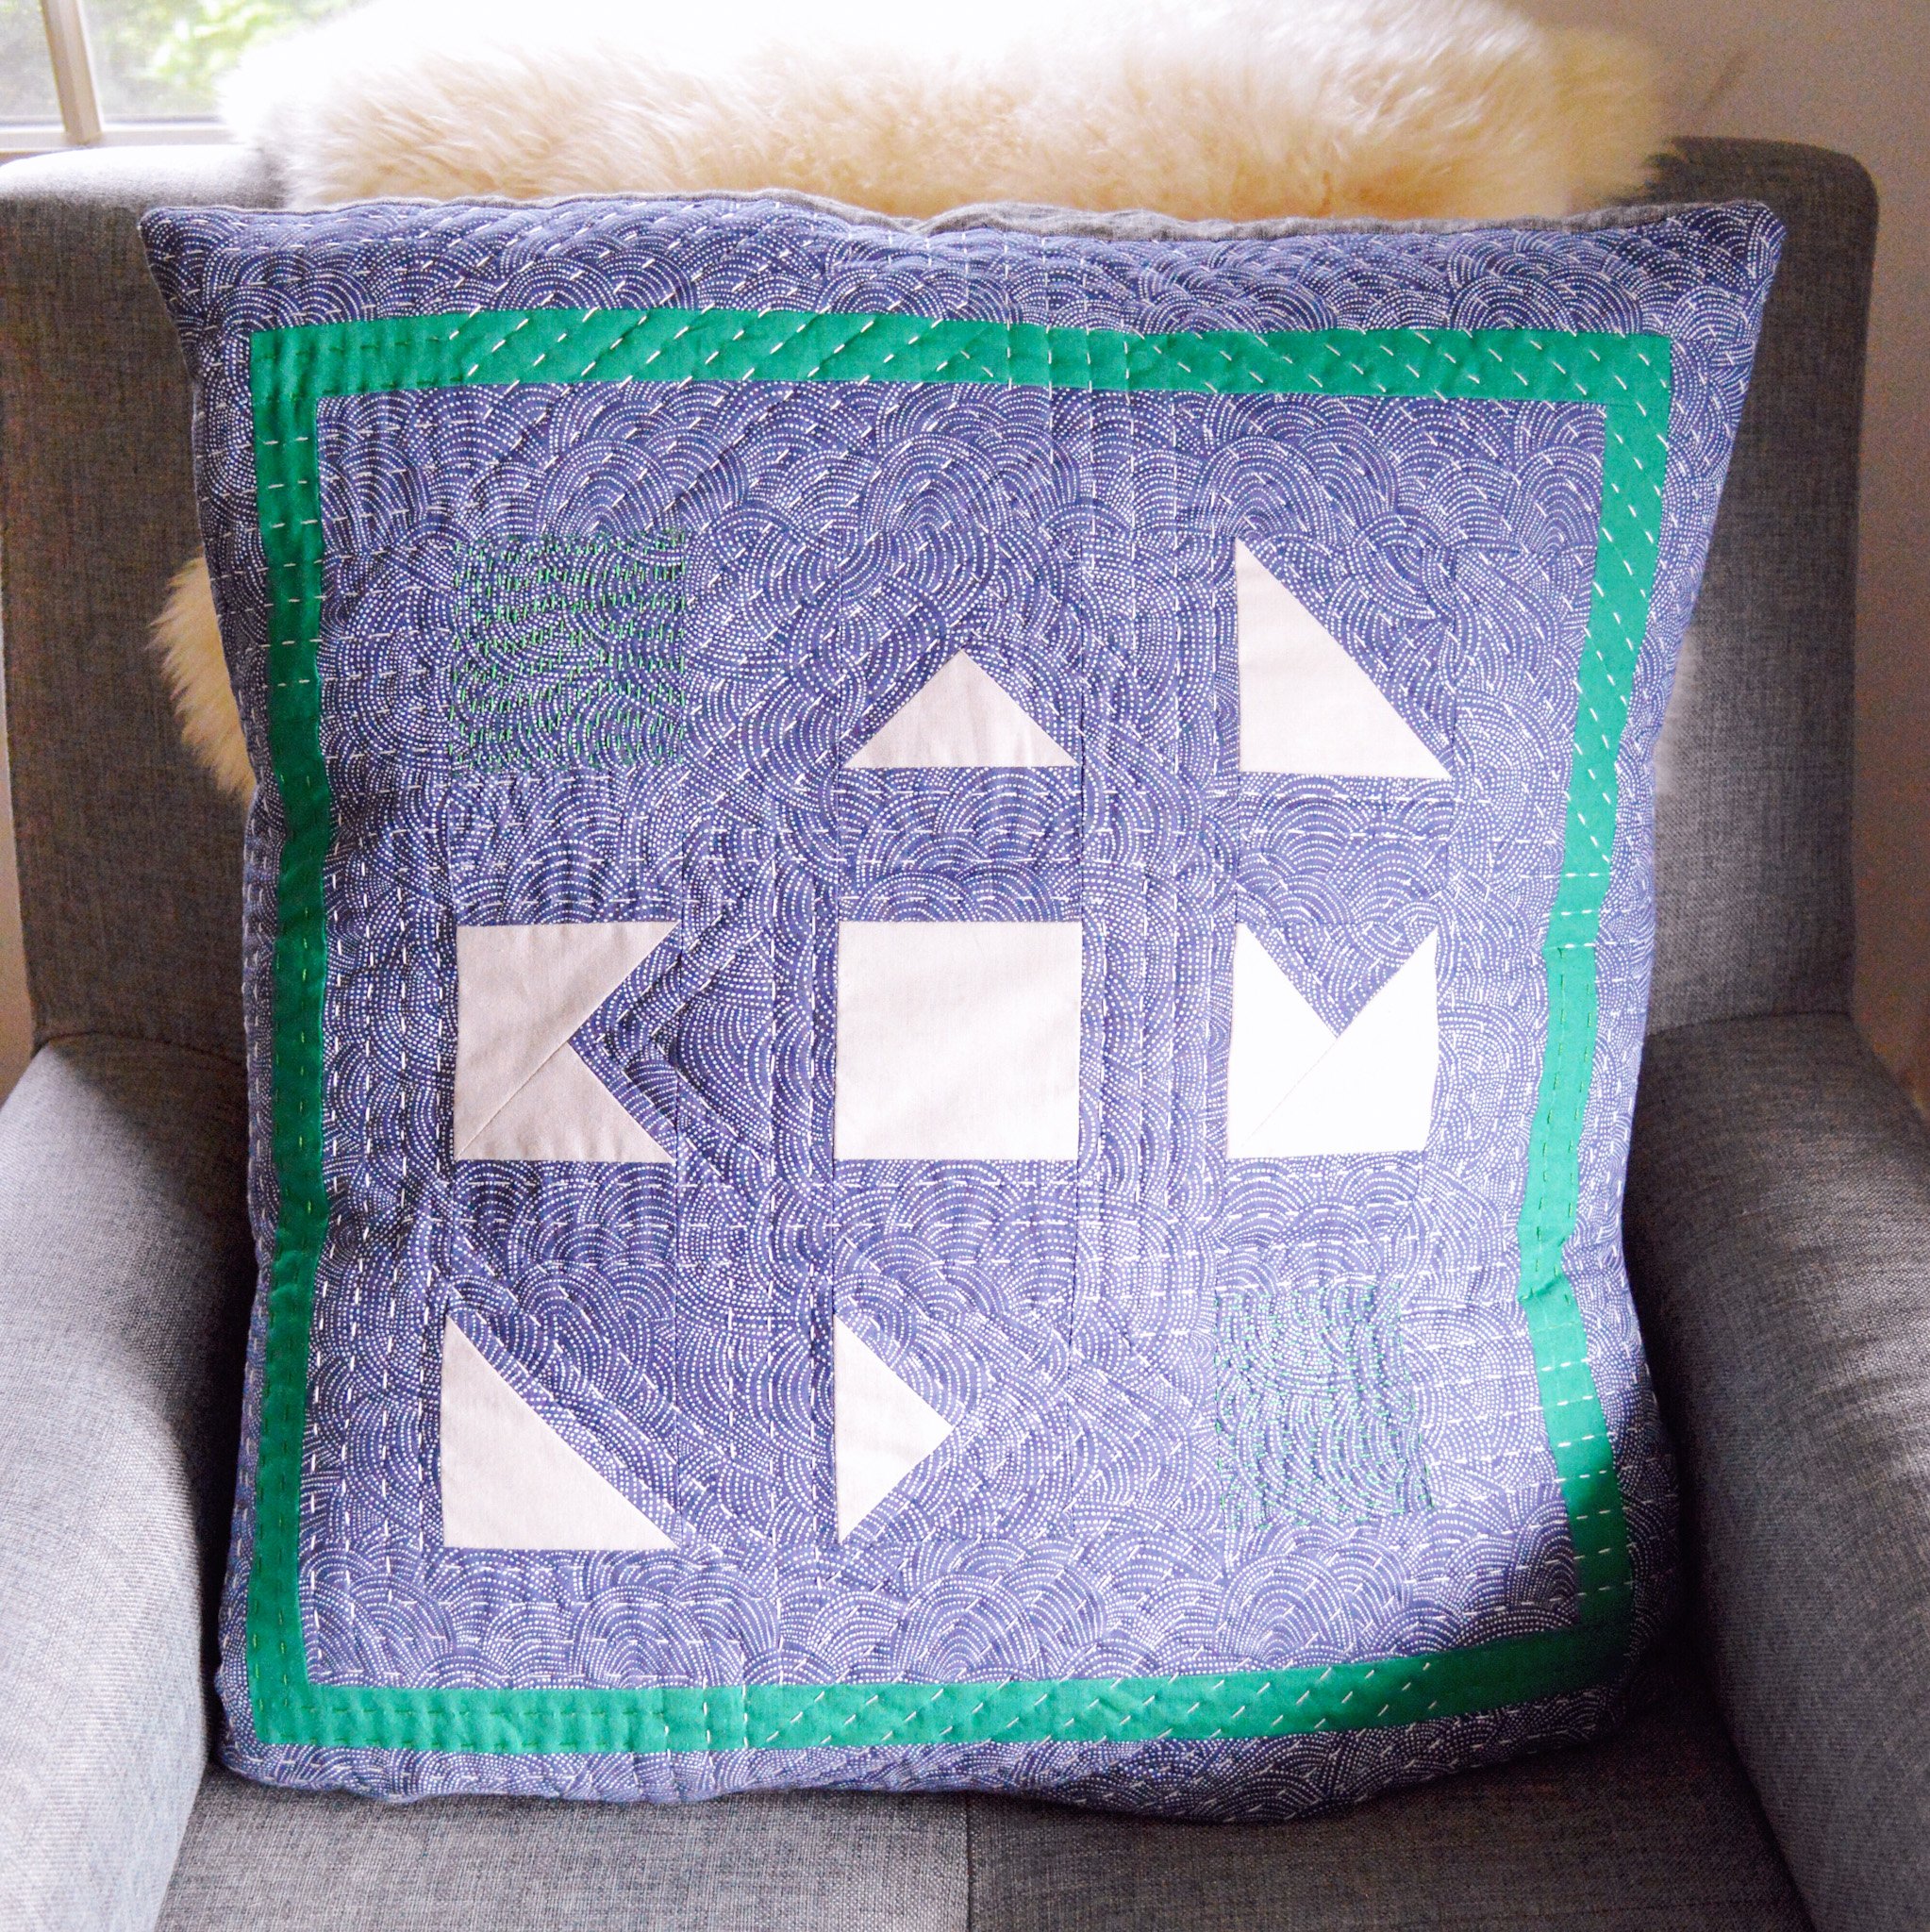 How To Make An Envelope Pillow